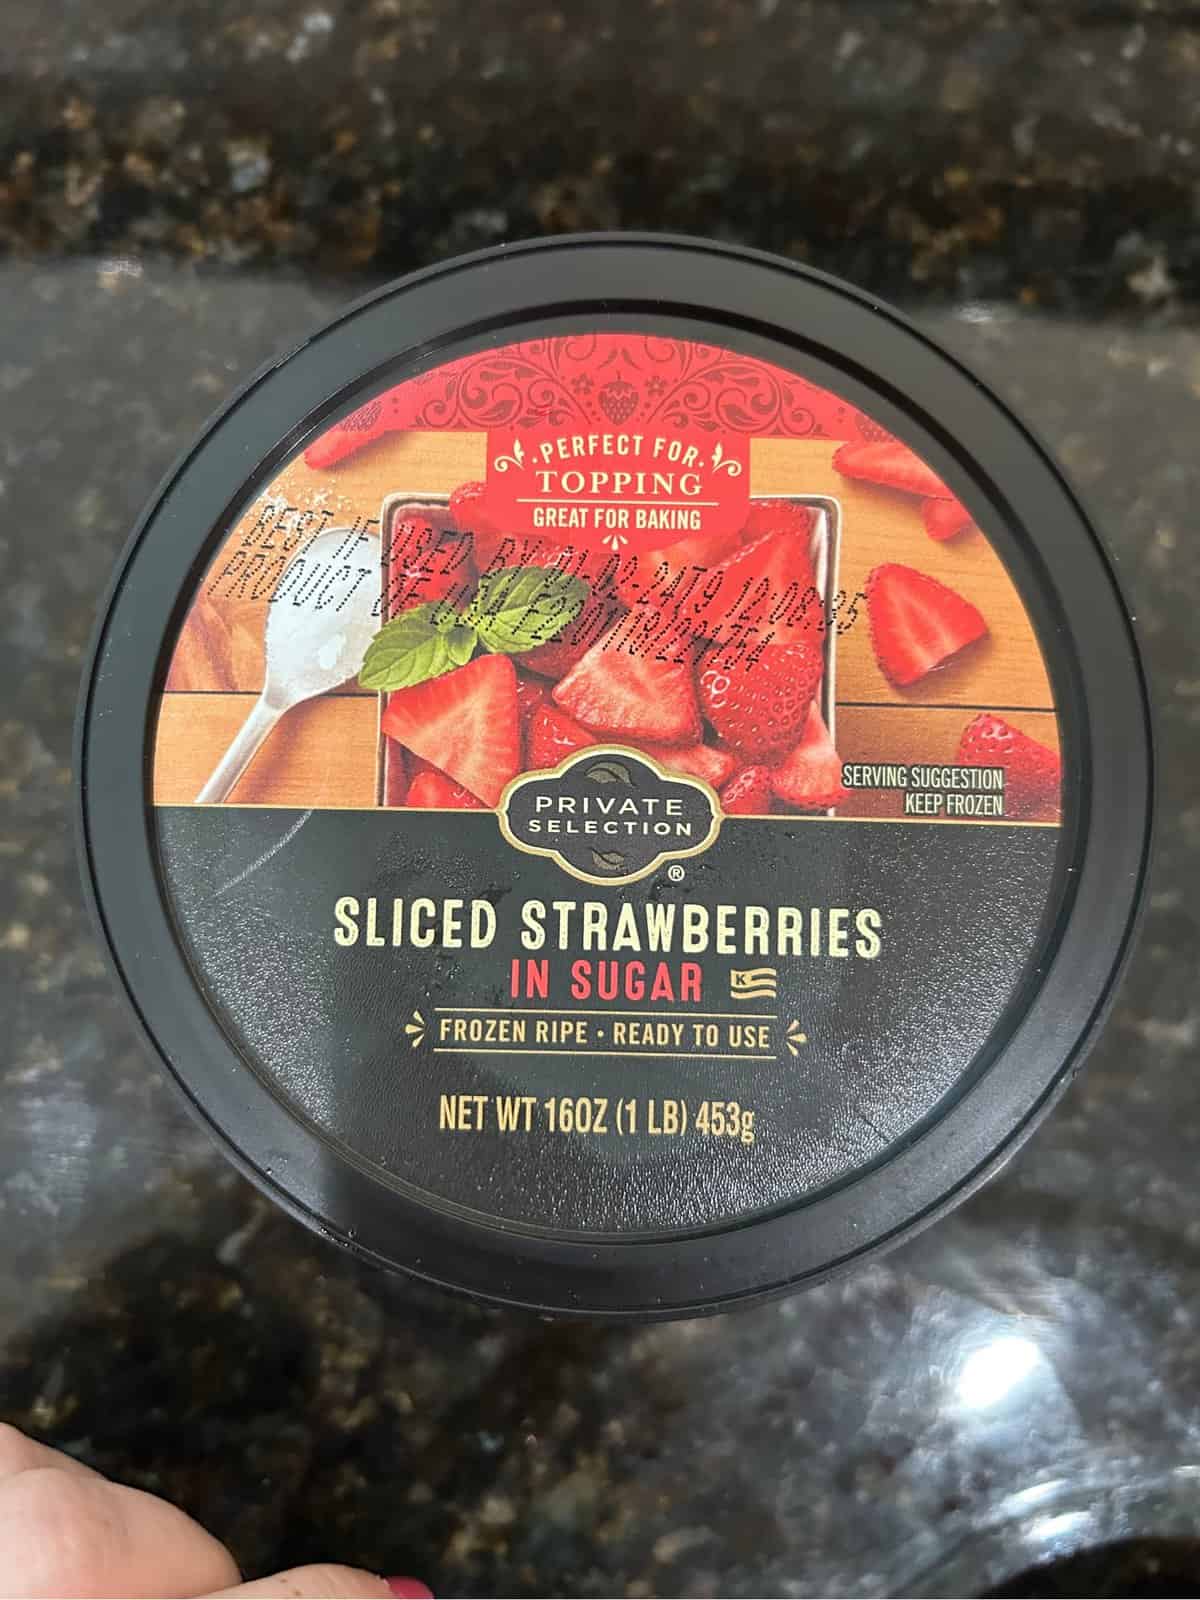 Grocery store brand container of frozen sliced strawberries, Black lid with red berries